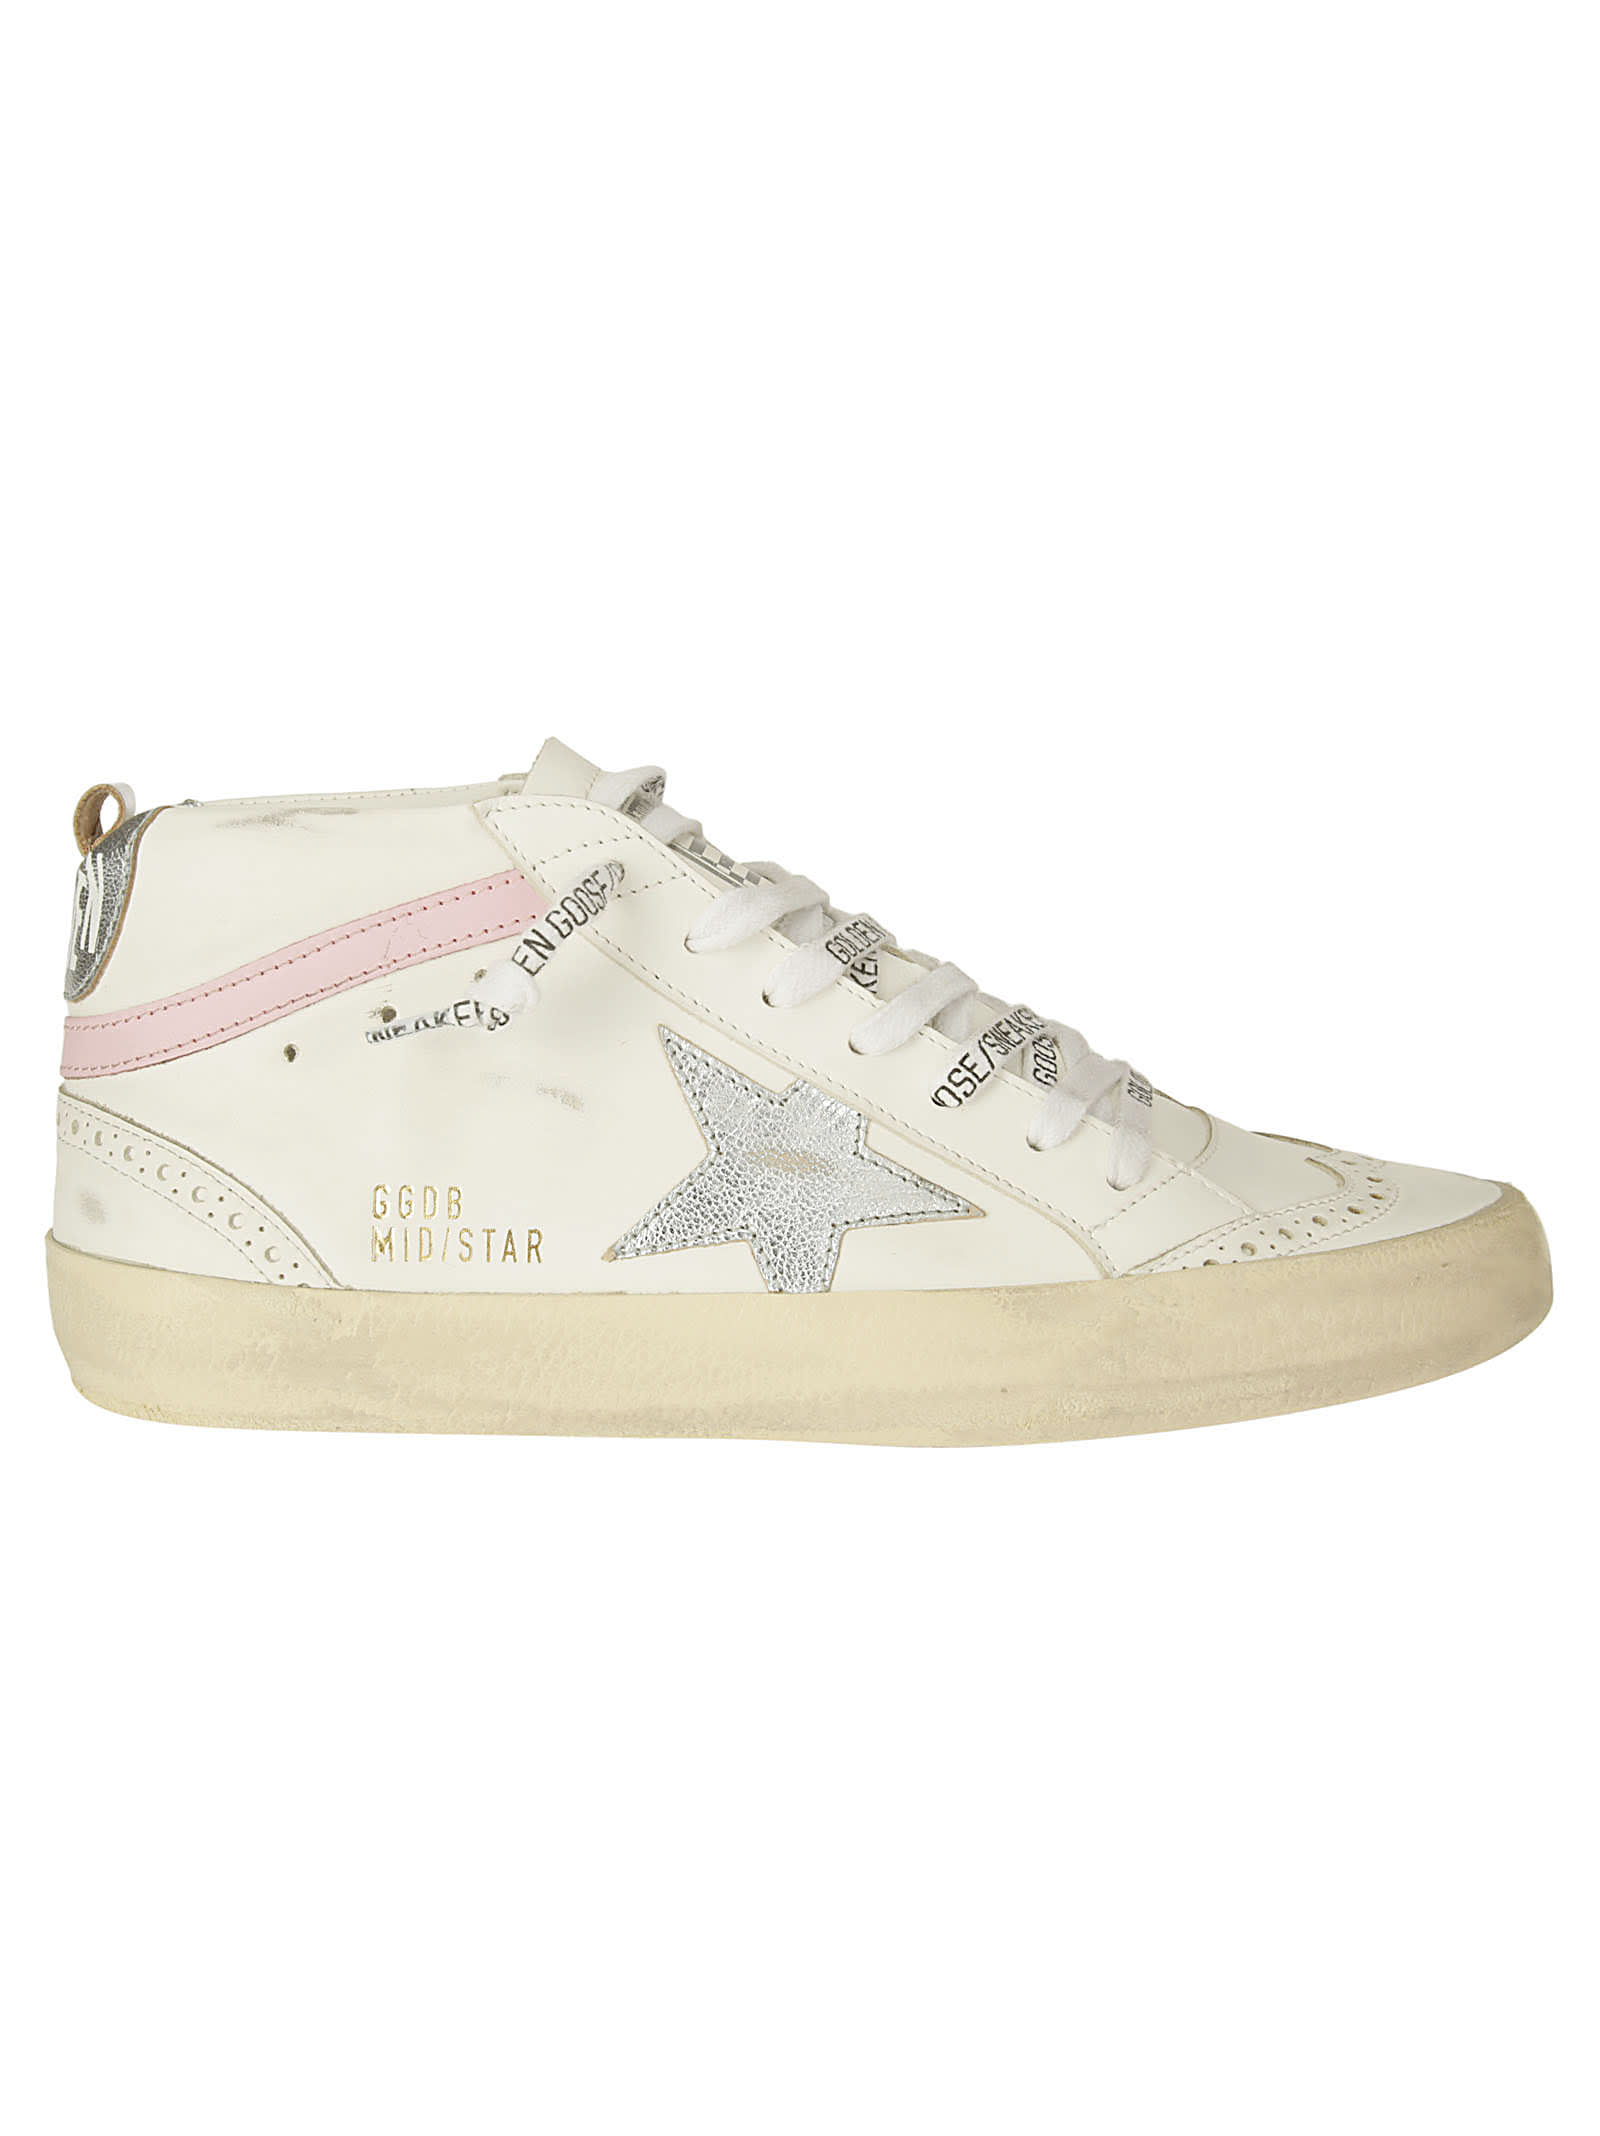 GOLDEN GOOSE MID STAR LEATHER UPPER AND WAVE LAMINATED STAR